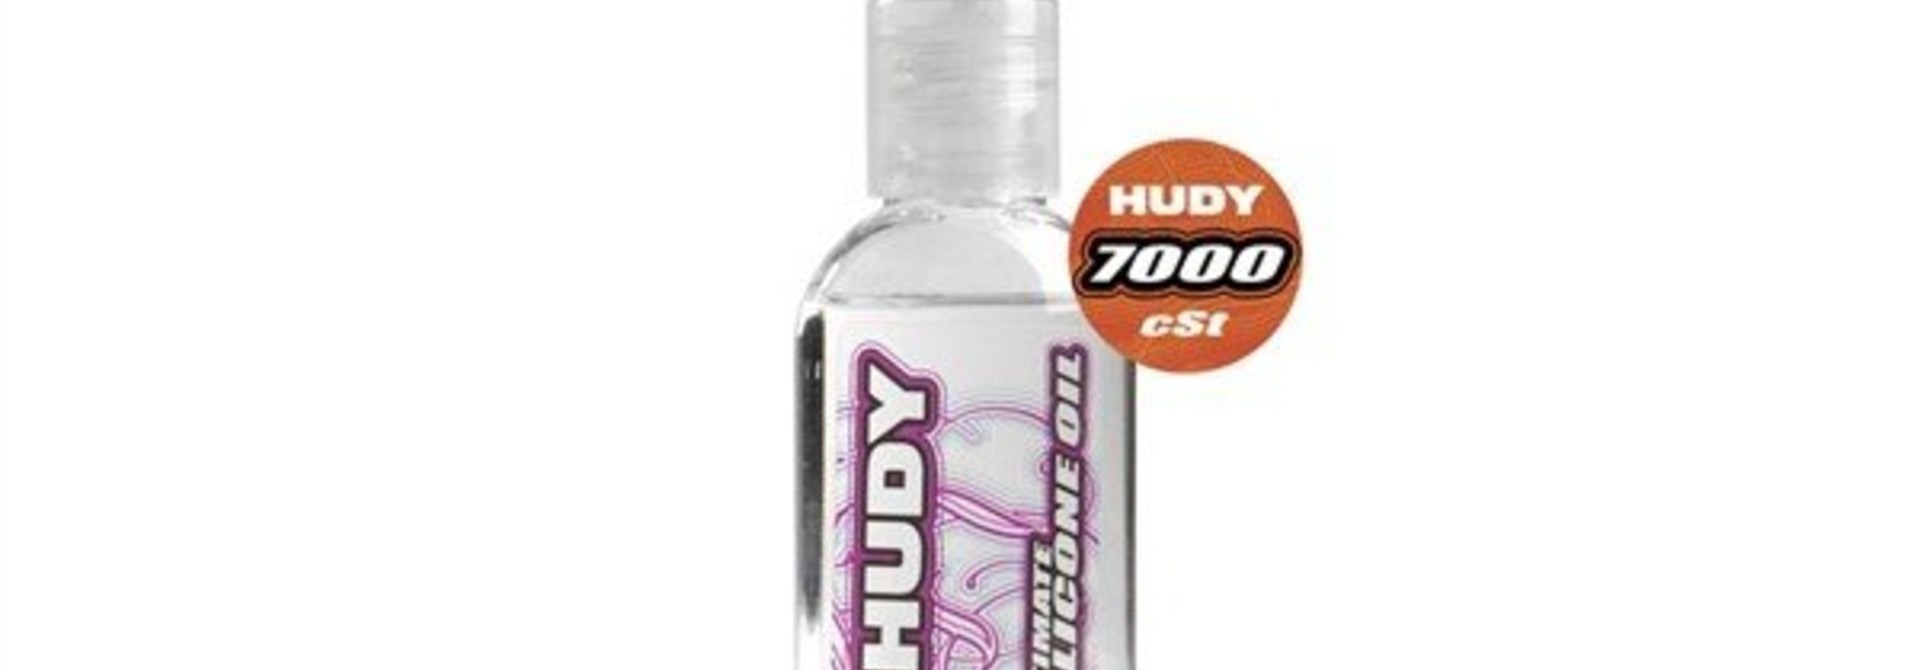 HUDY ULTIMATE SILICONE OIL 7000 cSt - 50ML. H106470